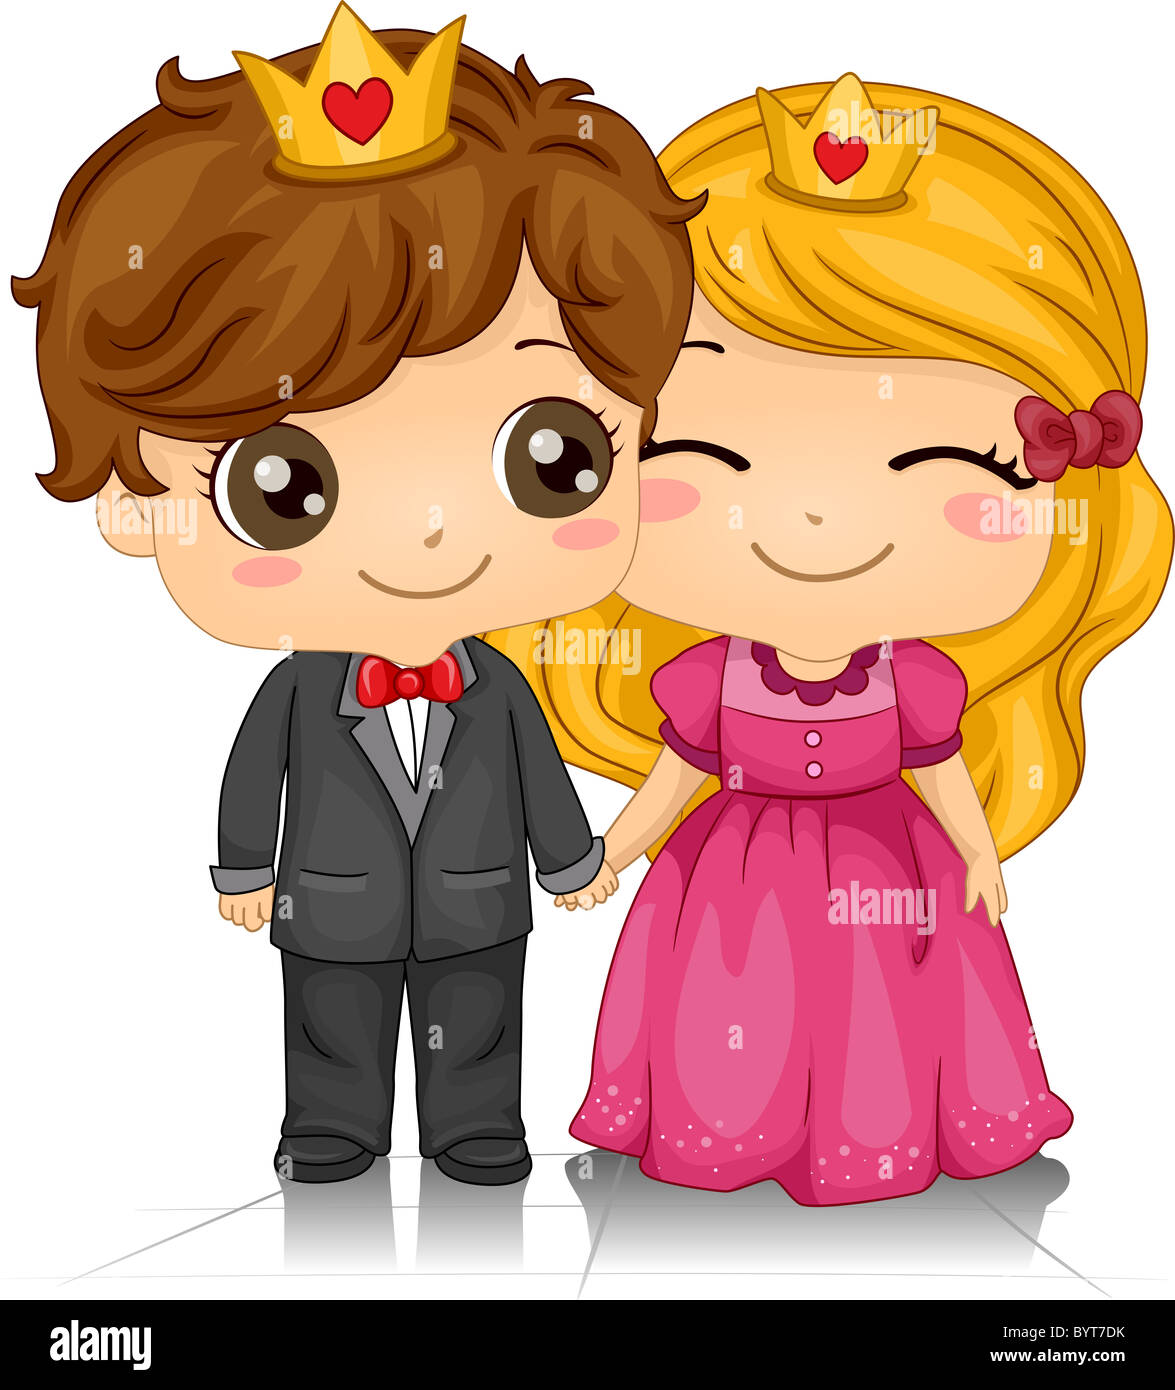 Illustration of a Couple Wearing Crowns on Their Heads Stock Photo